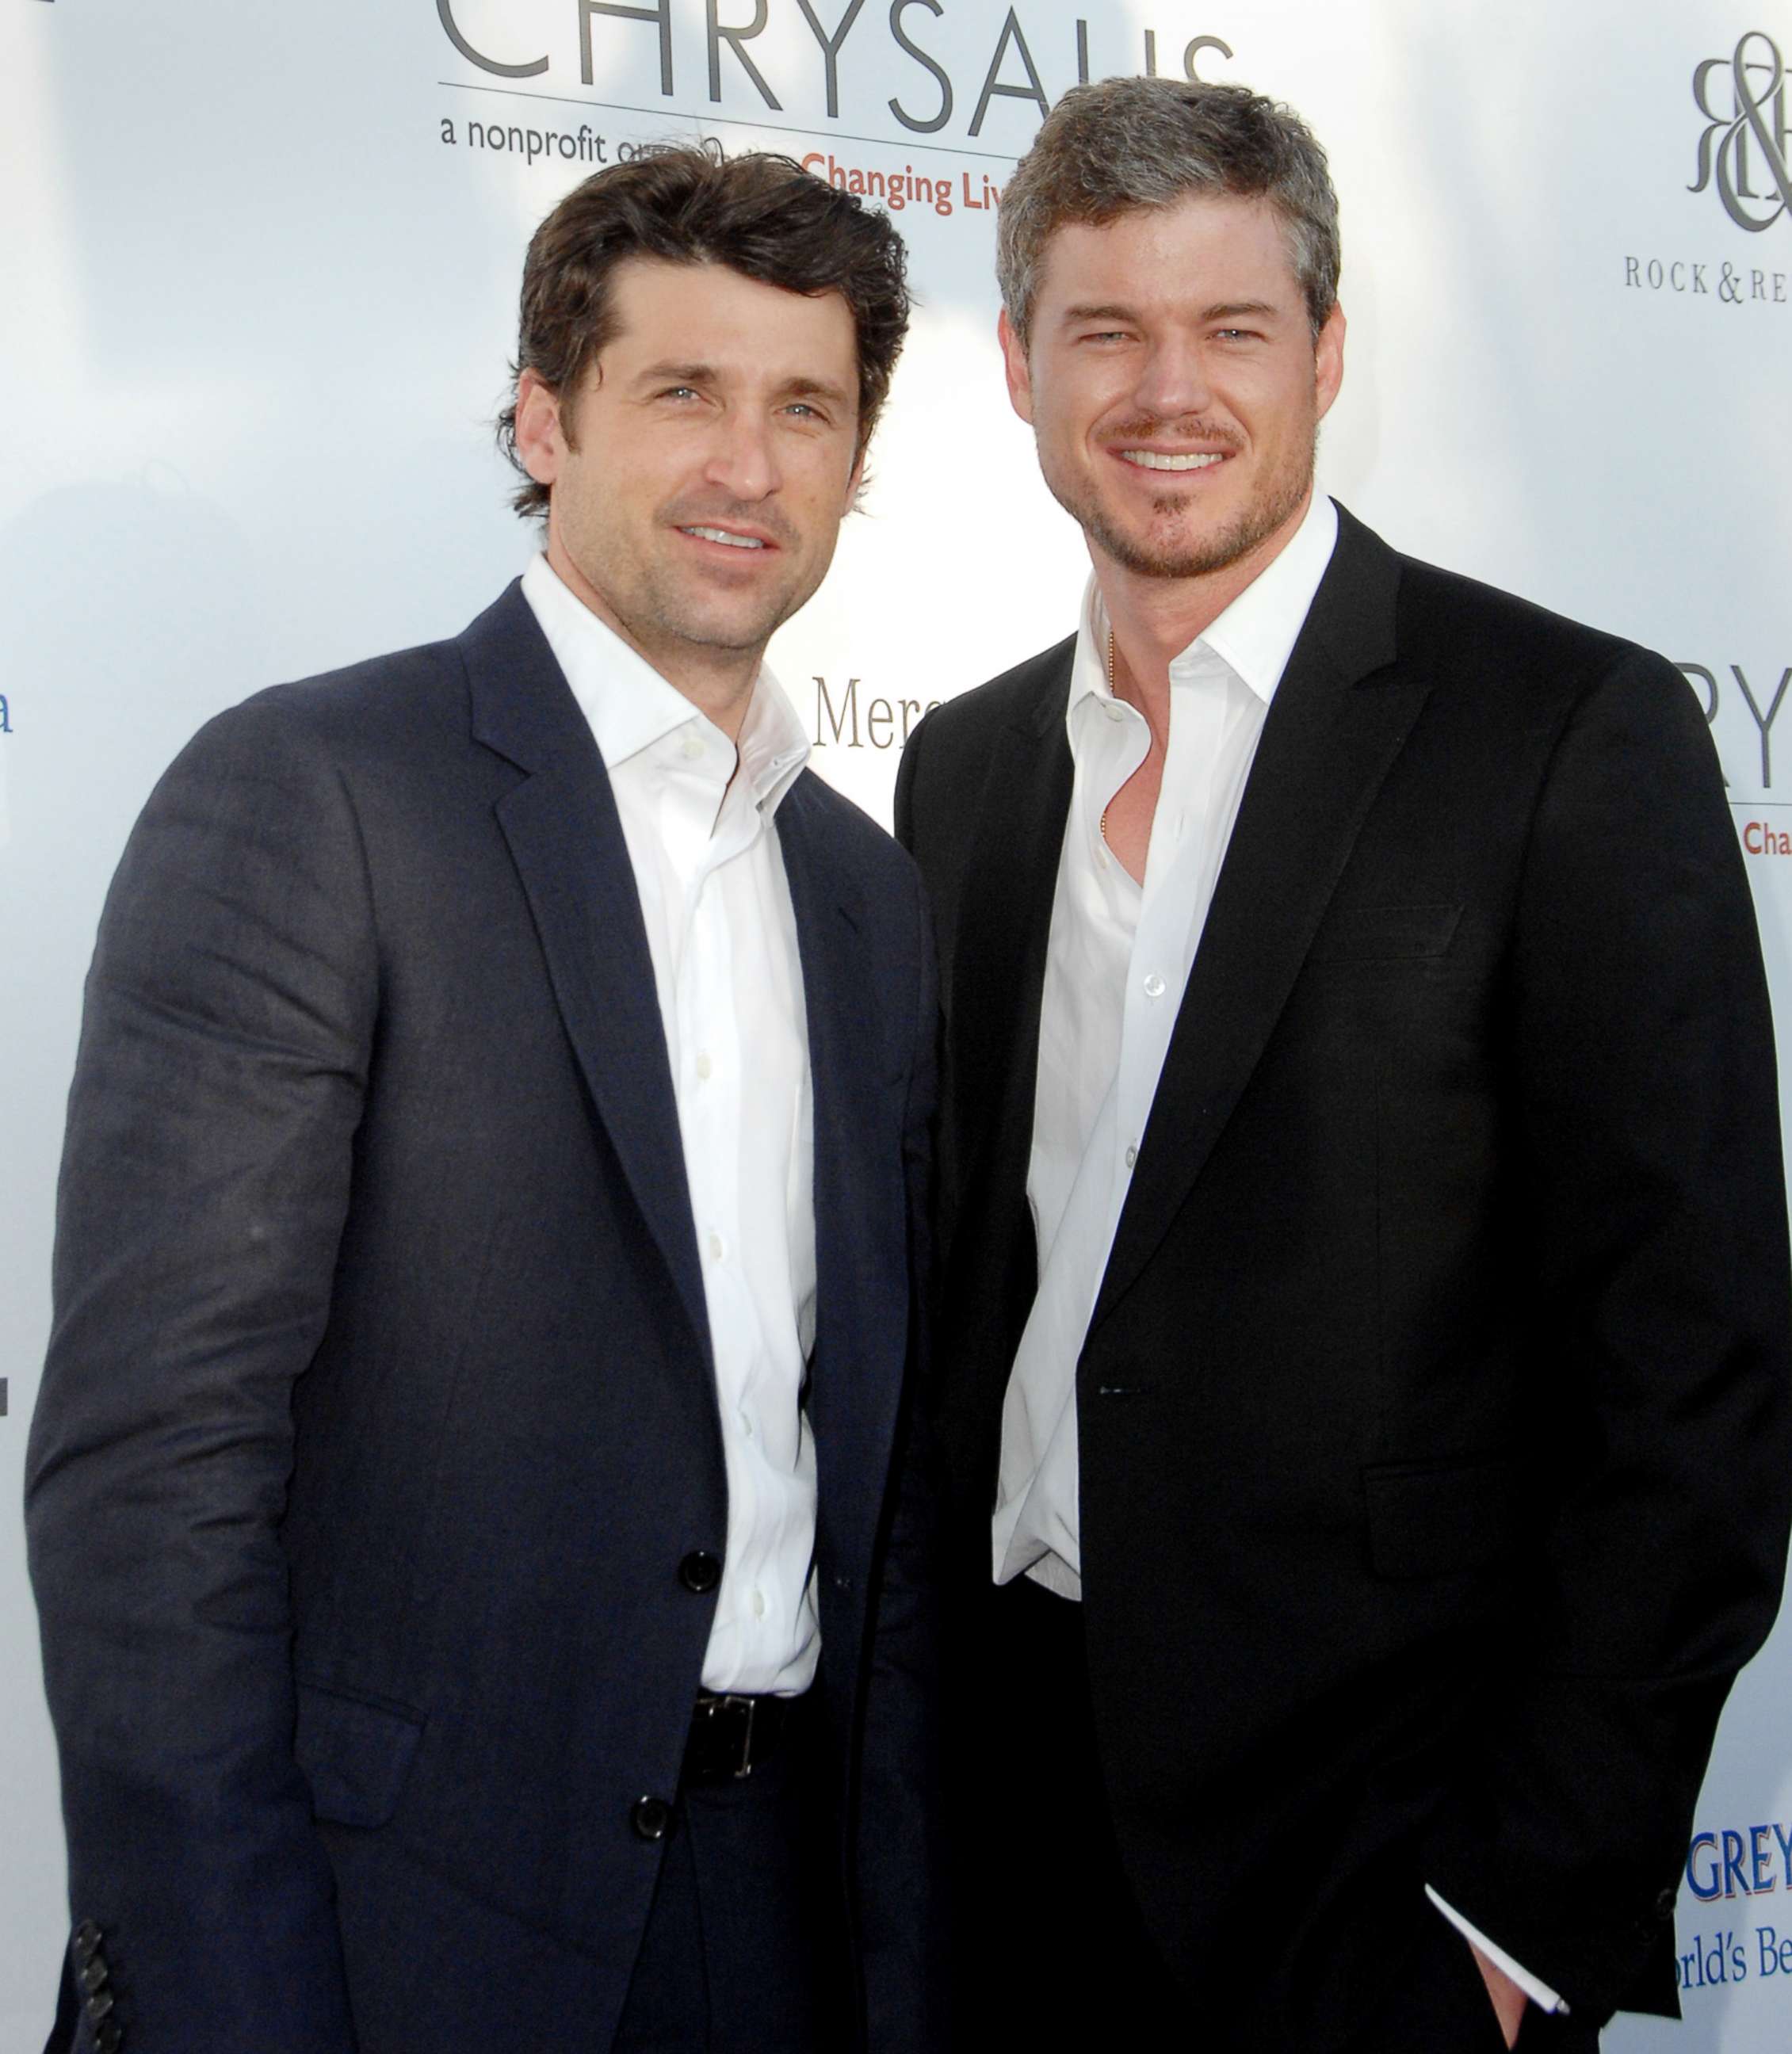 PHOTO: Patrick Dempsey and Eric Dane attend an event on June 2, 2007.